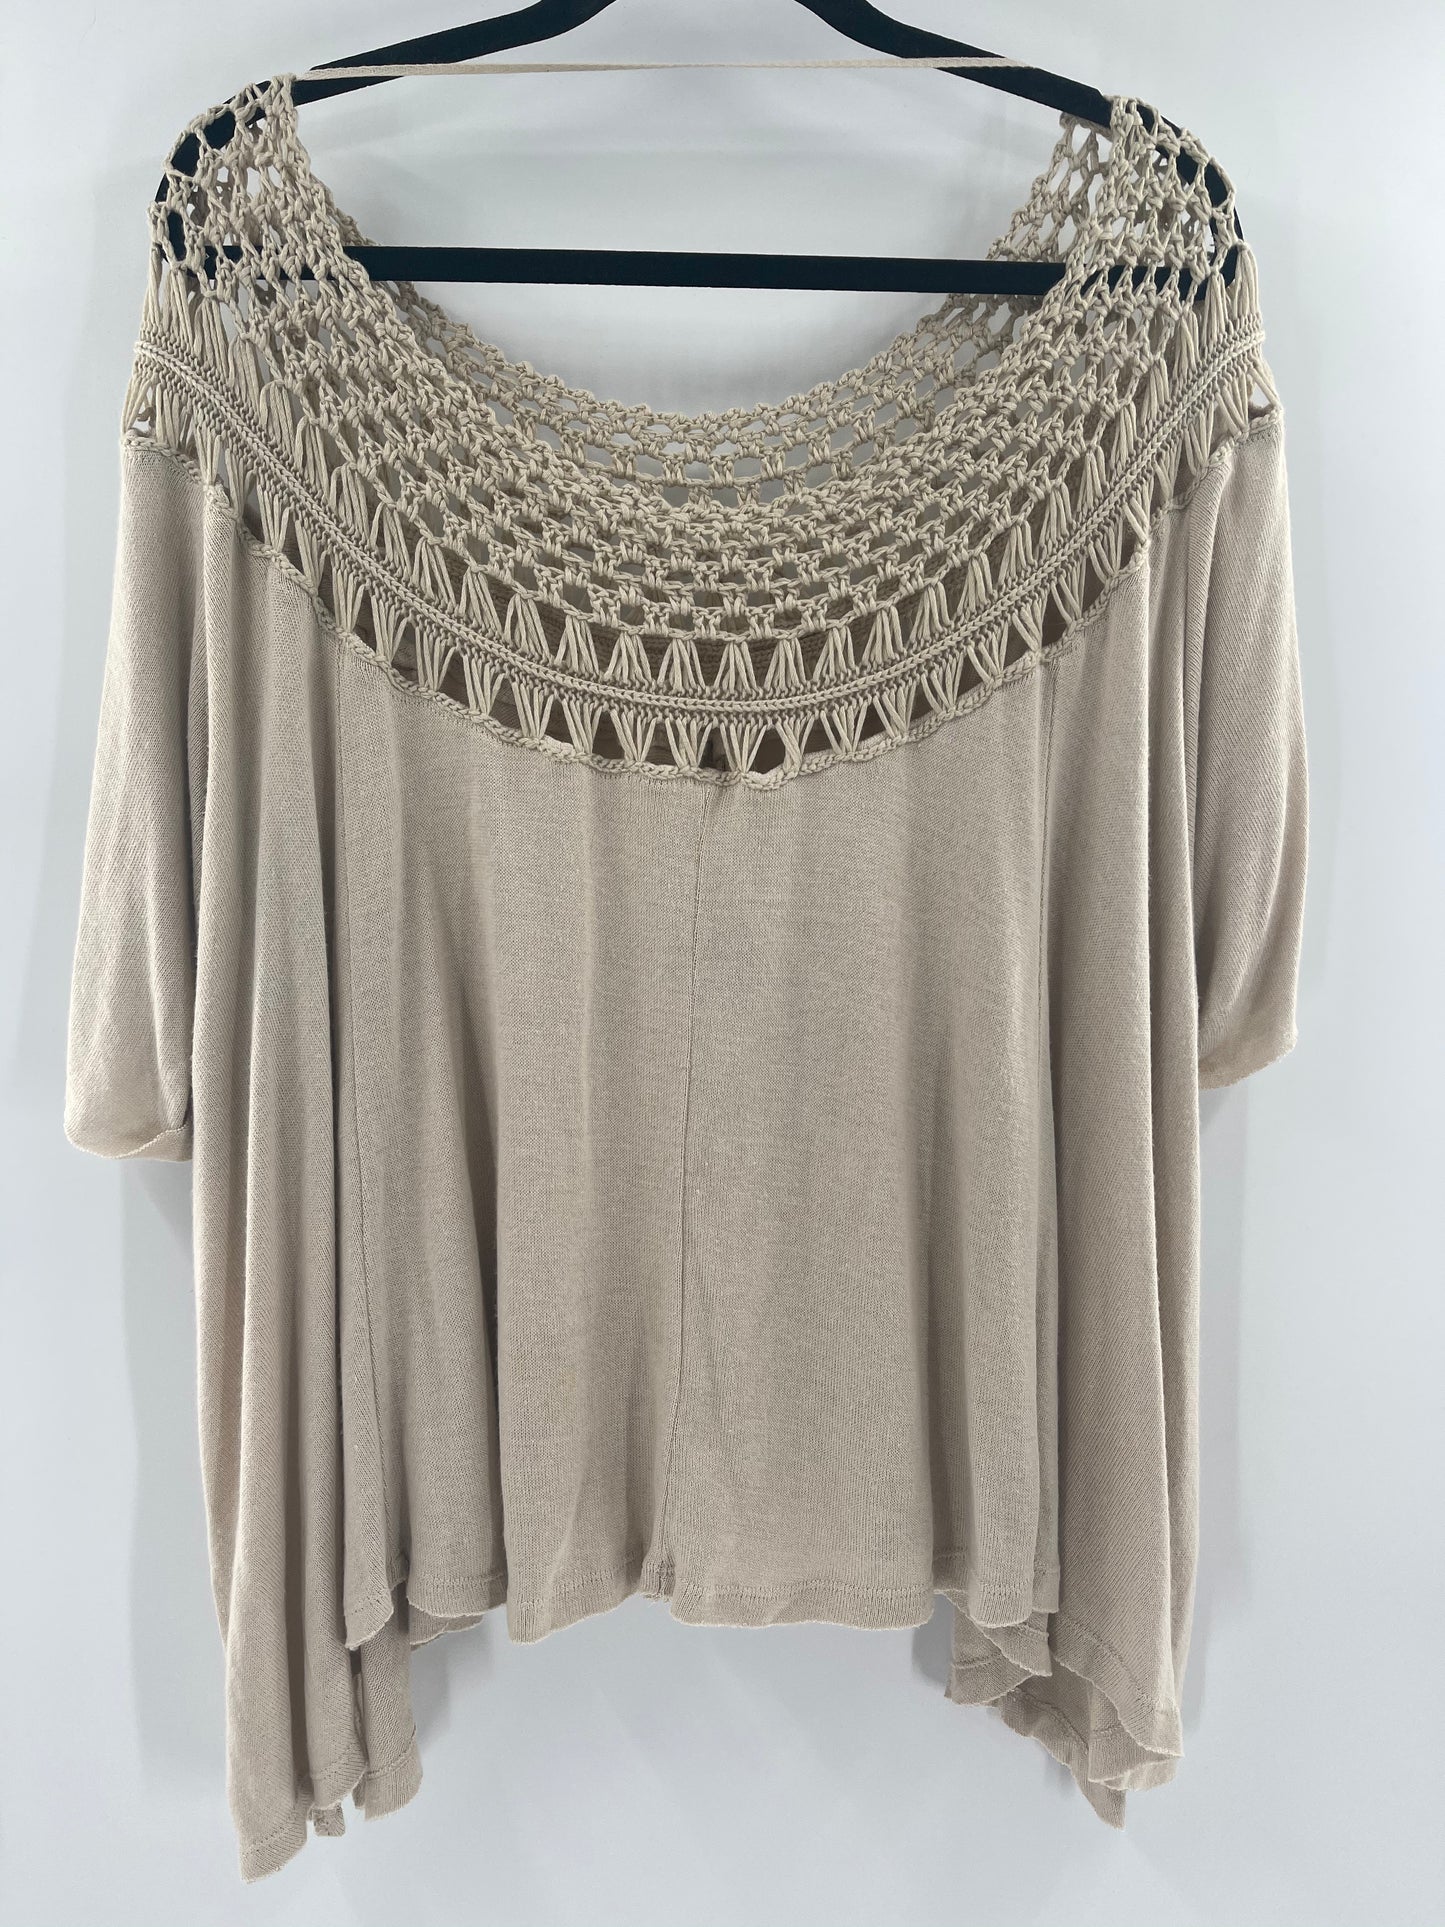 Free People - We The Free -   Short Sleeve Light Beige Top with Crochet and Macrame Details on Neckline (Size XL)